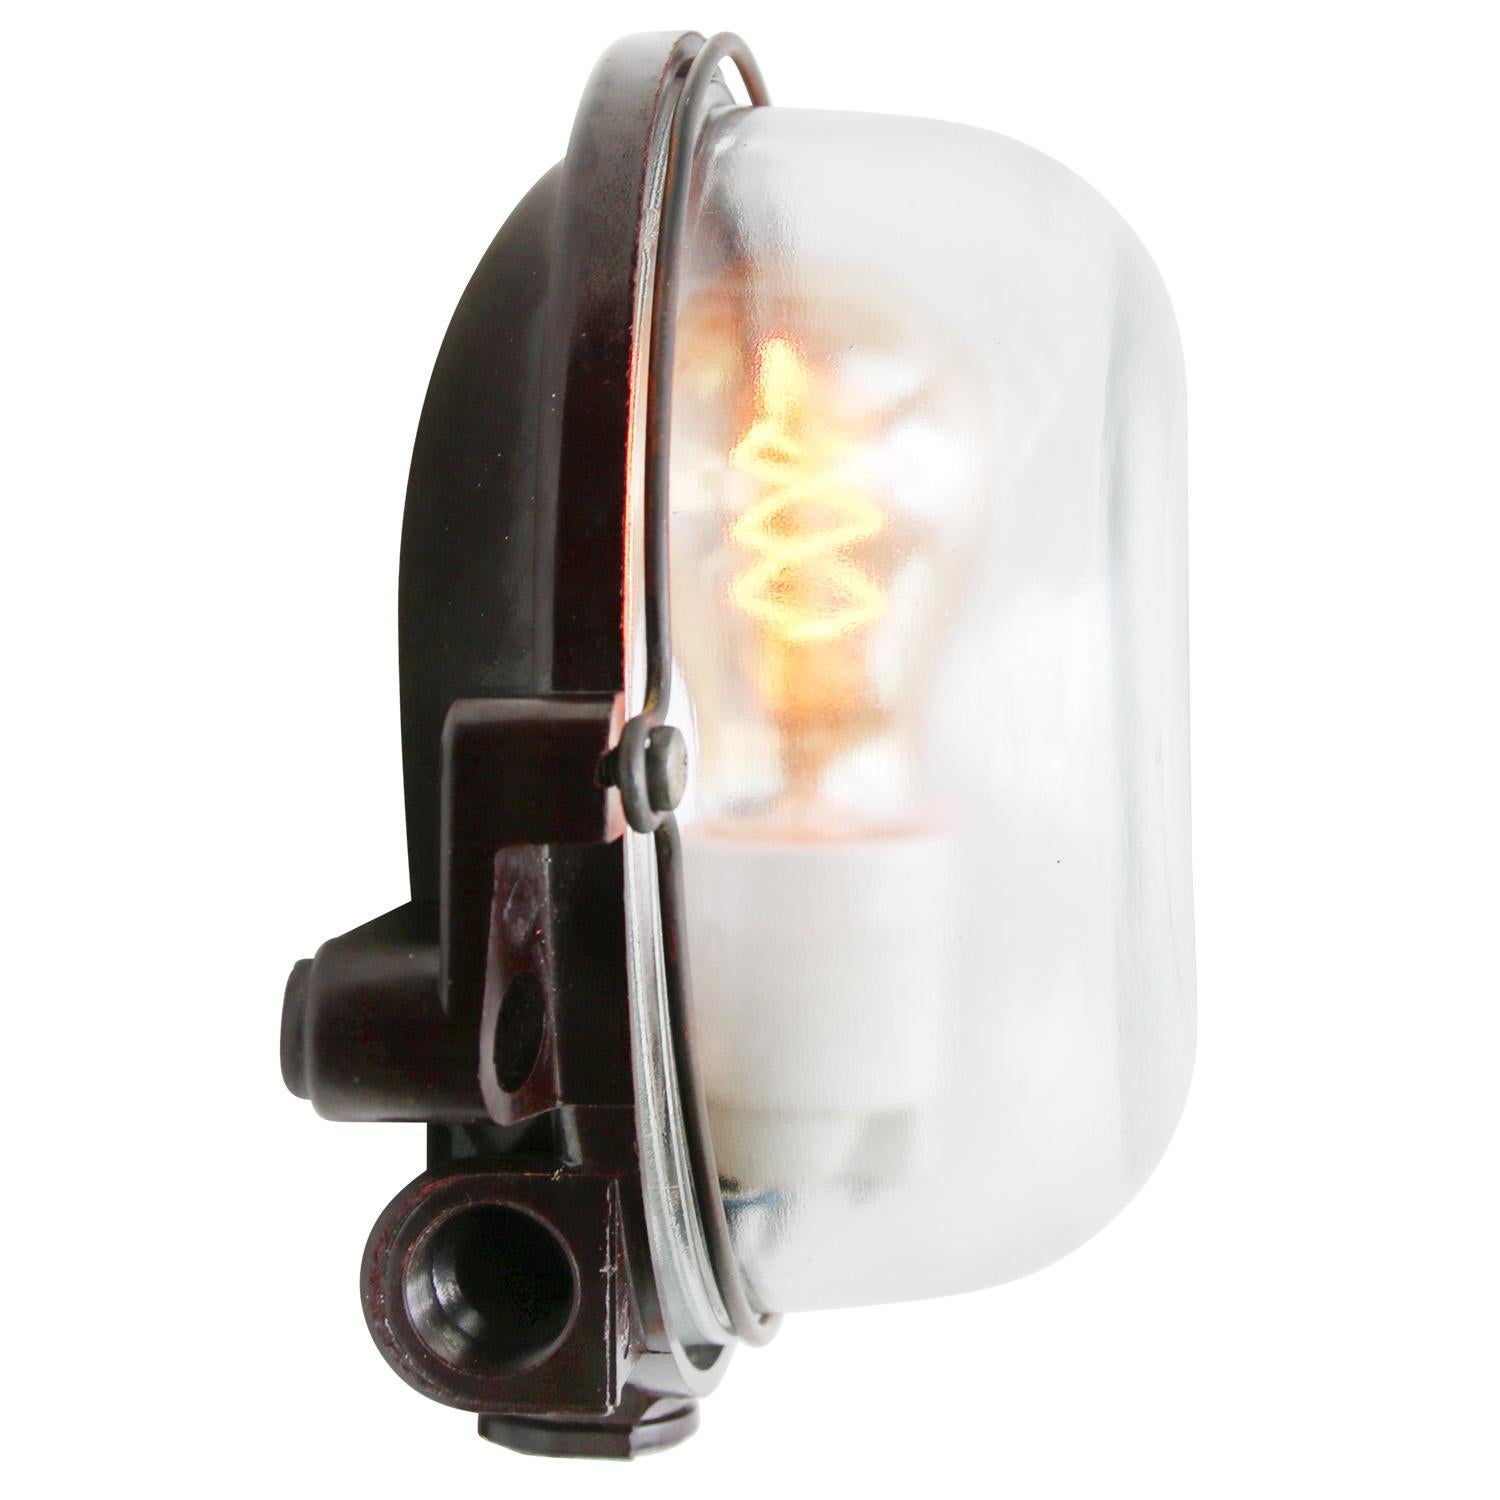 Industrial wall and ceiling scone. Bakelite back. Clear glass.

Weight 1.0 kg / 2.2 lb

Priced per individual item. All lamps have been made suitable by international standards for incandescent light bulbs, energy-efficient and LED bulbs. The